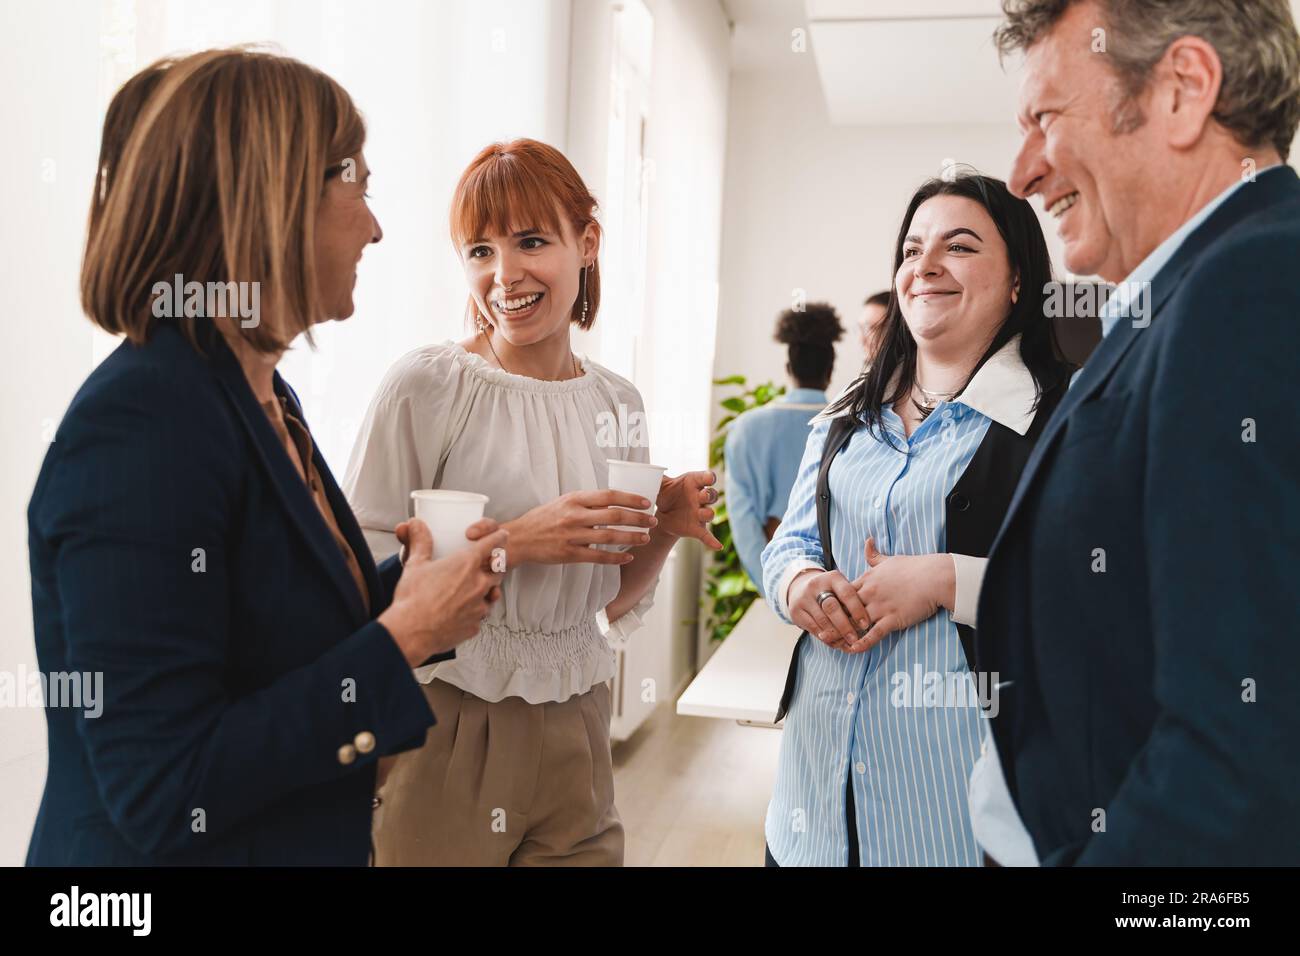 Group of colleagues in formal attire conversing and laughing near a window during an office break. Mix of senior and junior, set in a modern office. Stock Photo